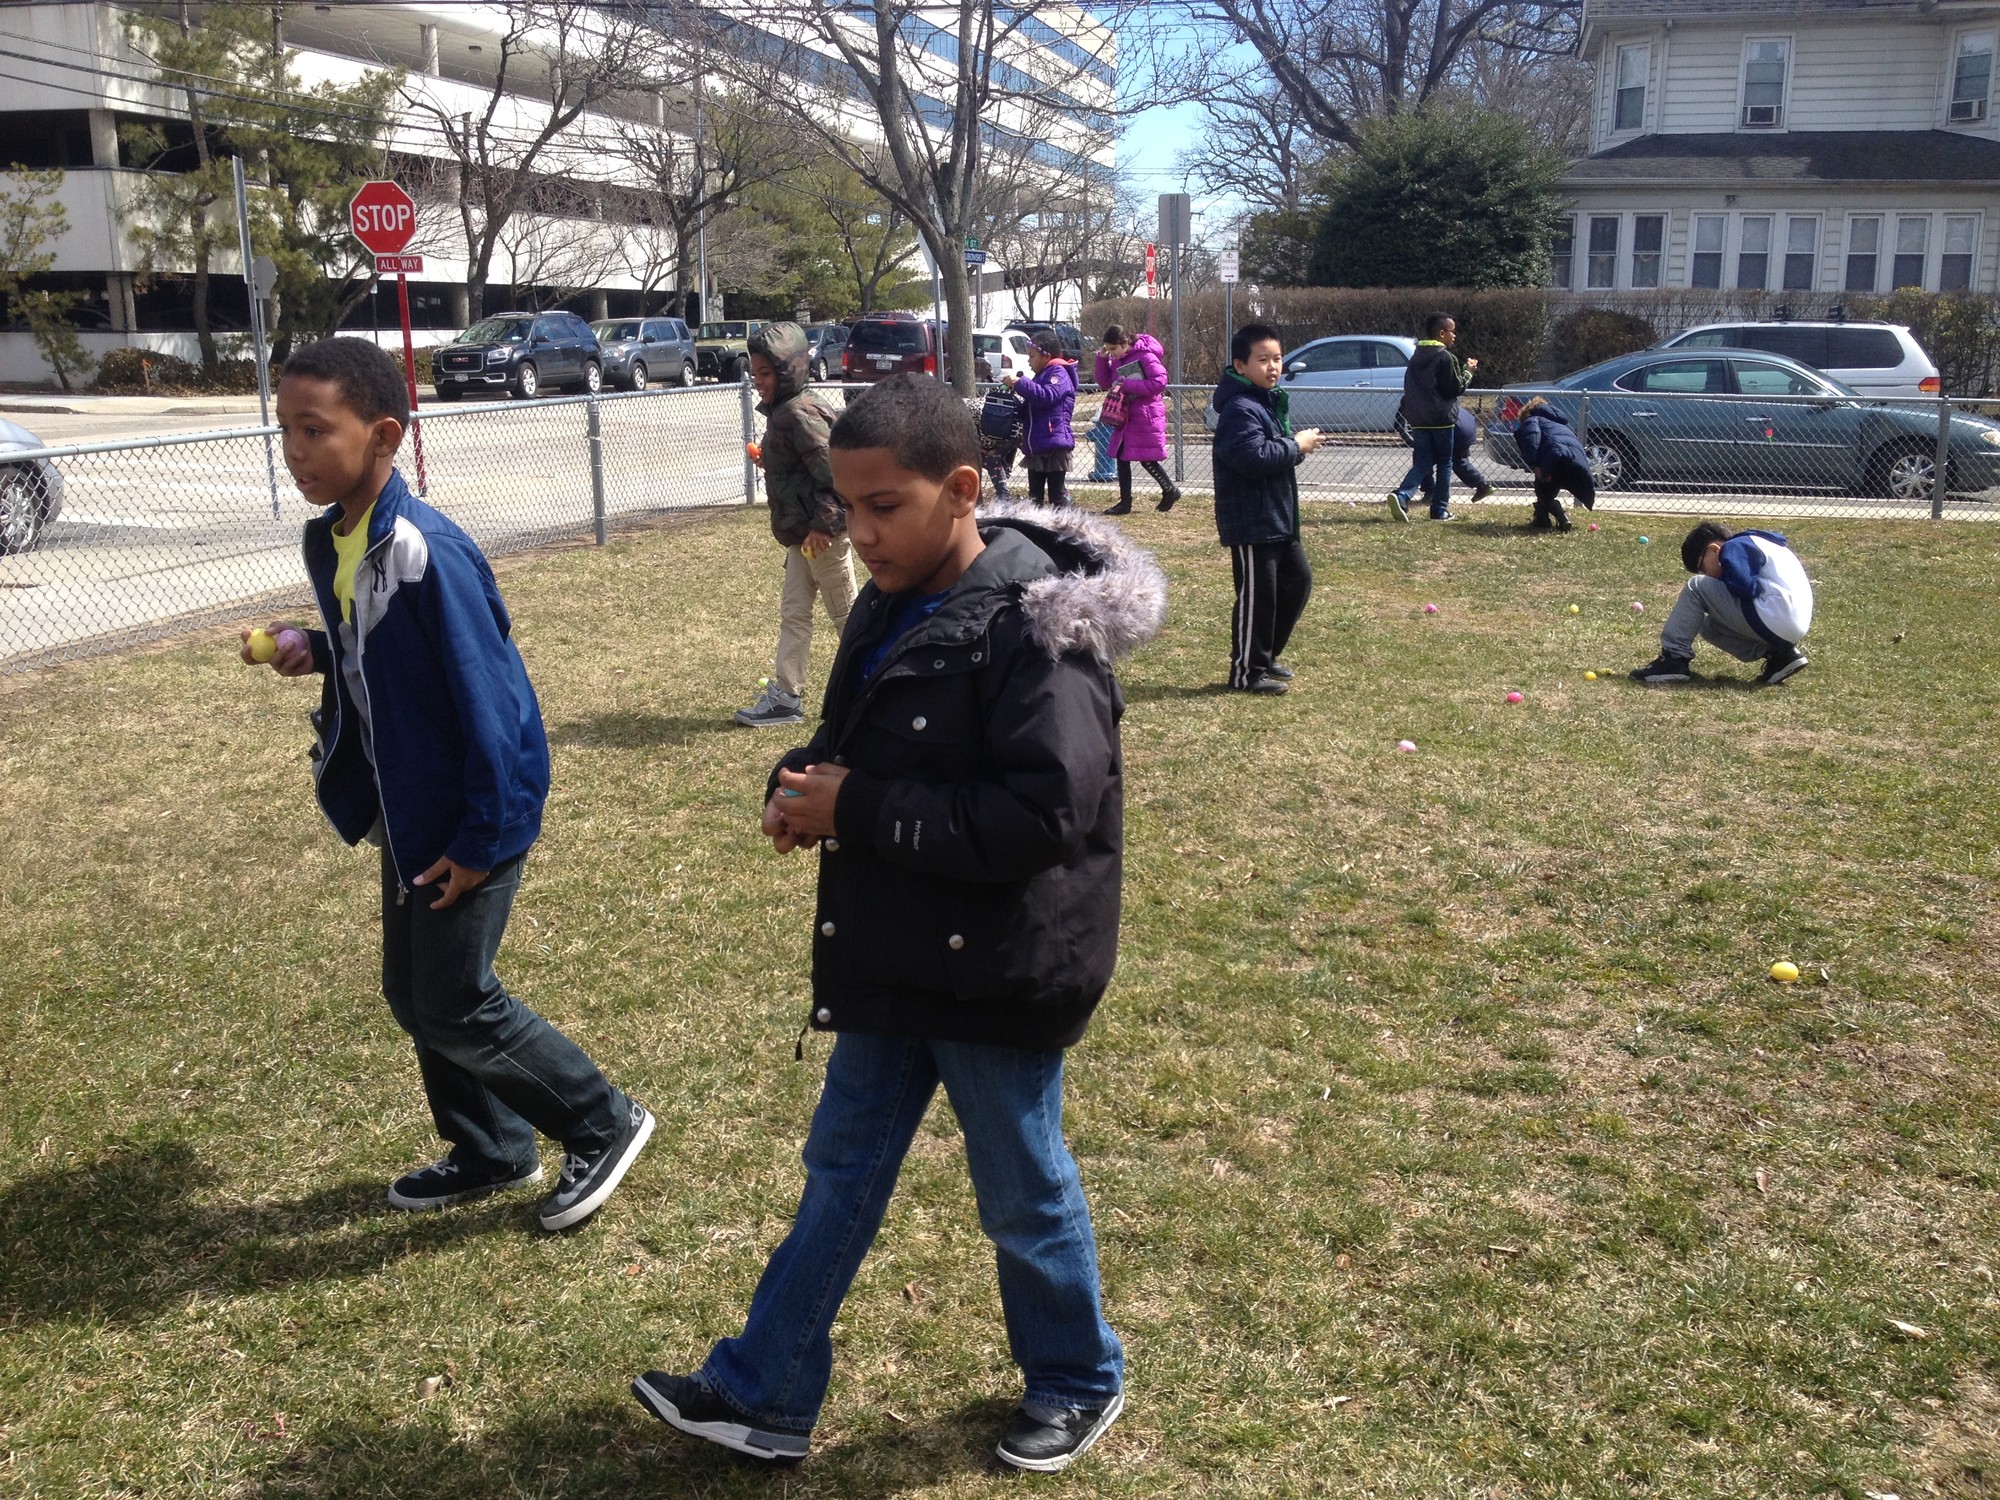 Students collected eggs outside the Brooklyn Avenue School on April 1.